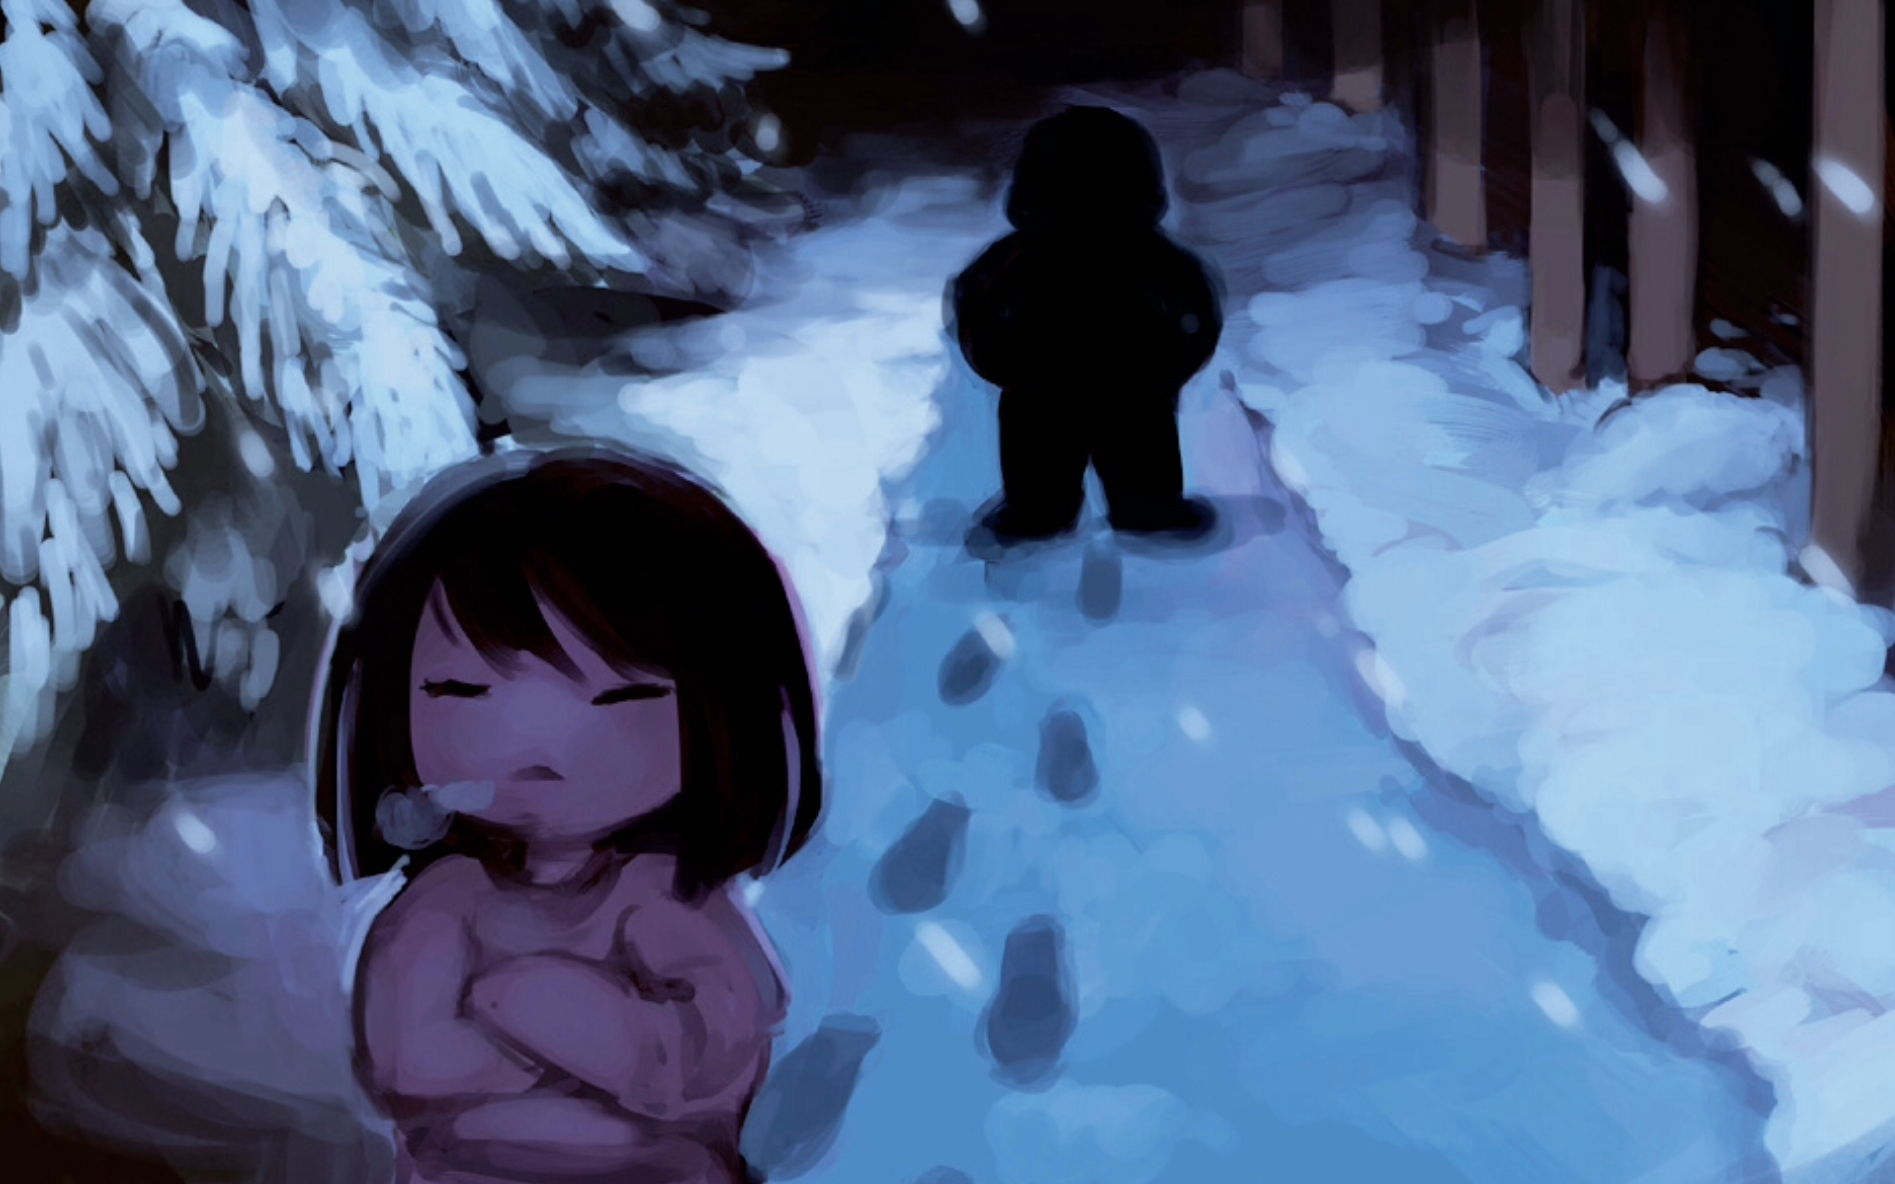 General 1895x1184 Undertale Frisk Sans Temmie Tobyfox snow Undertale art book cold closed eyes silhouette trees video games video game characters